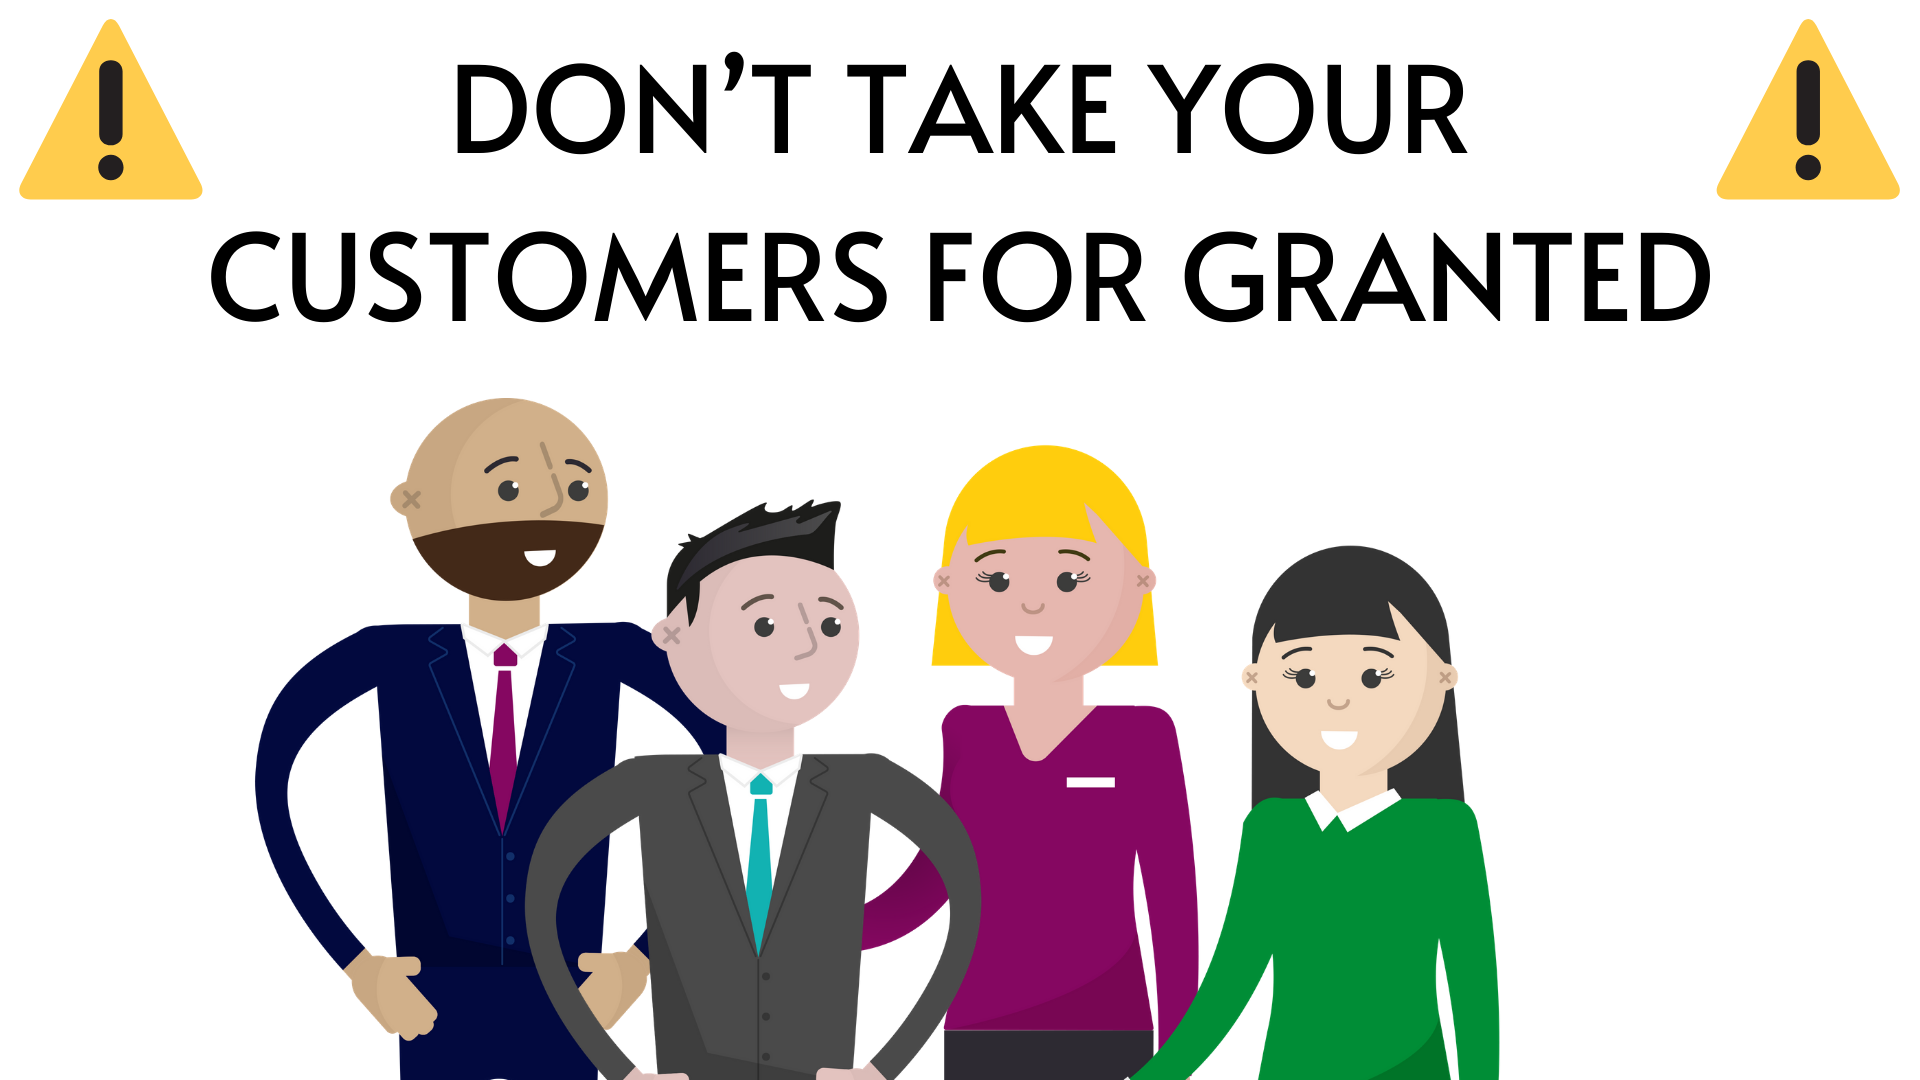 Don’t take customers for granted